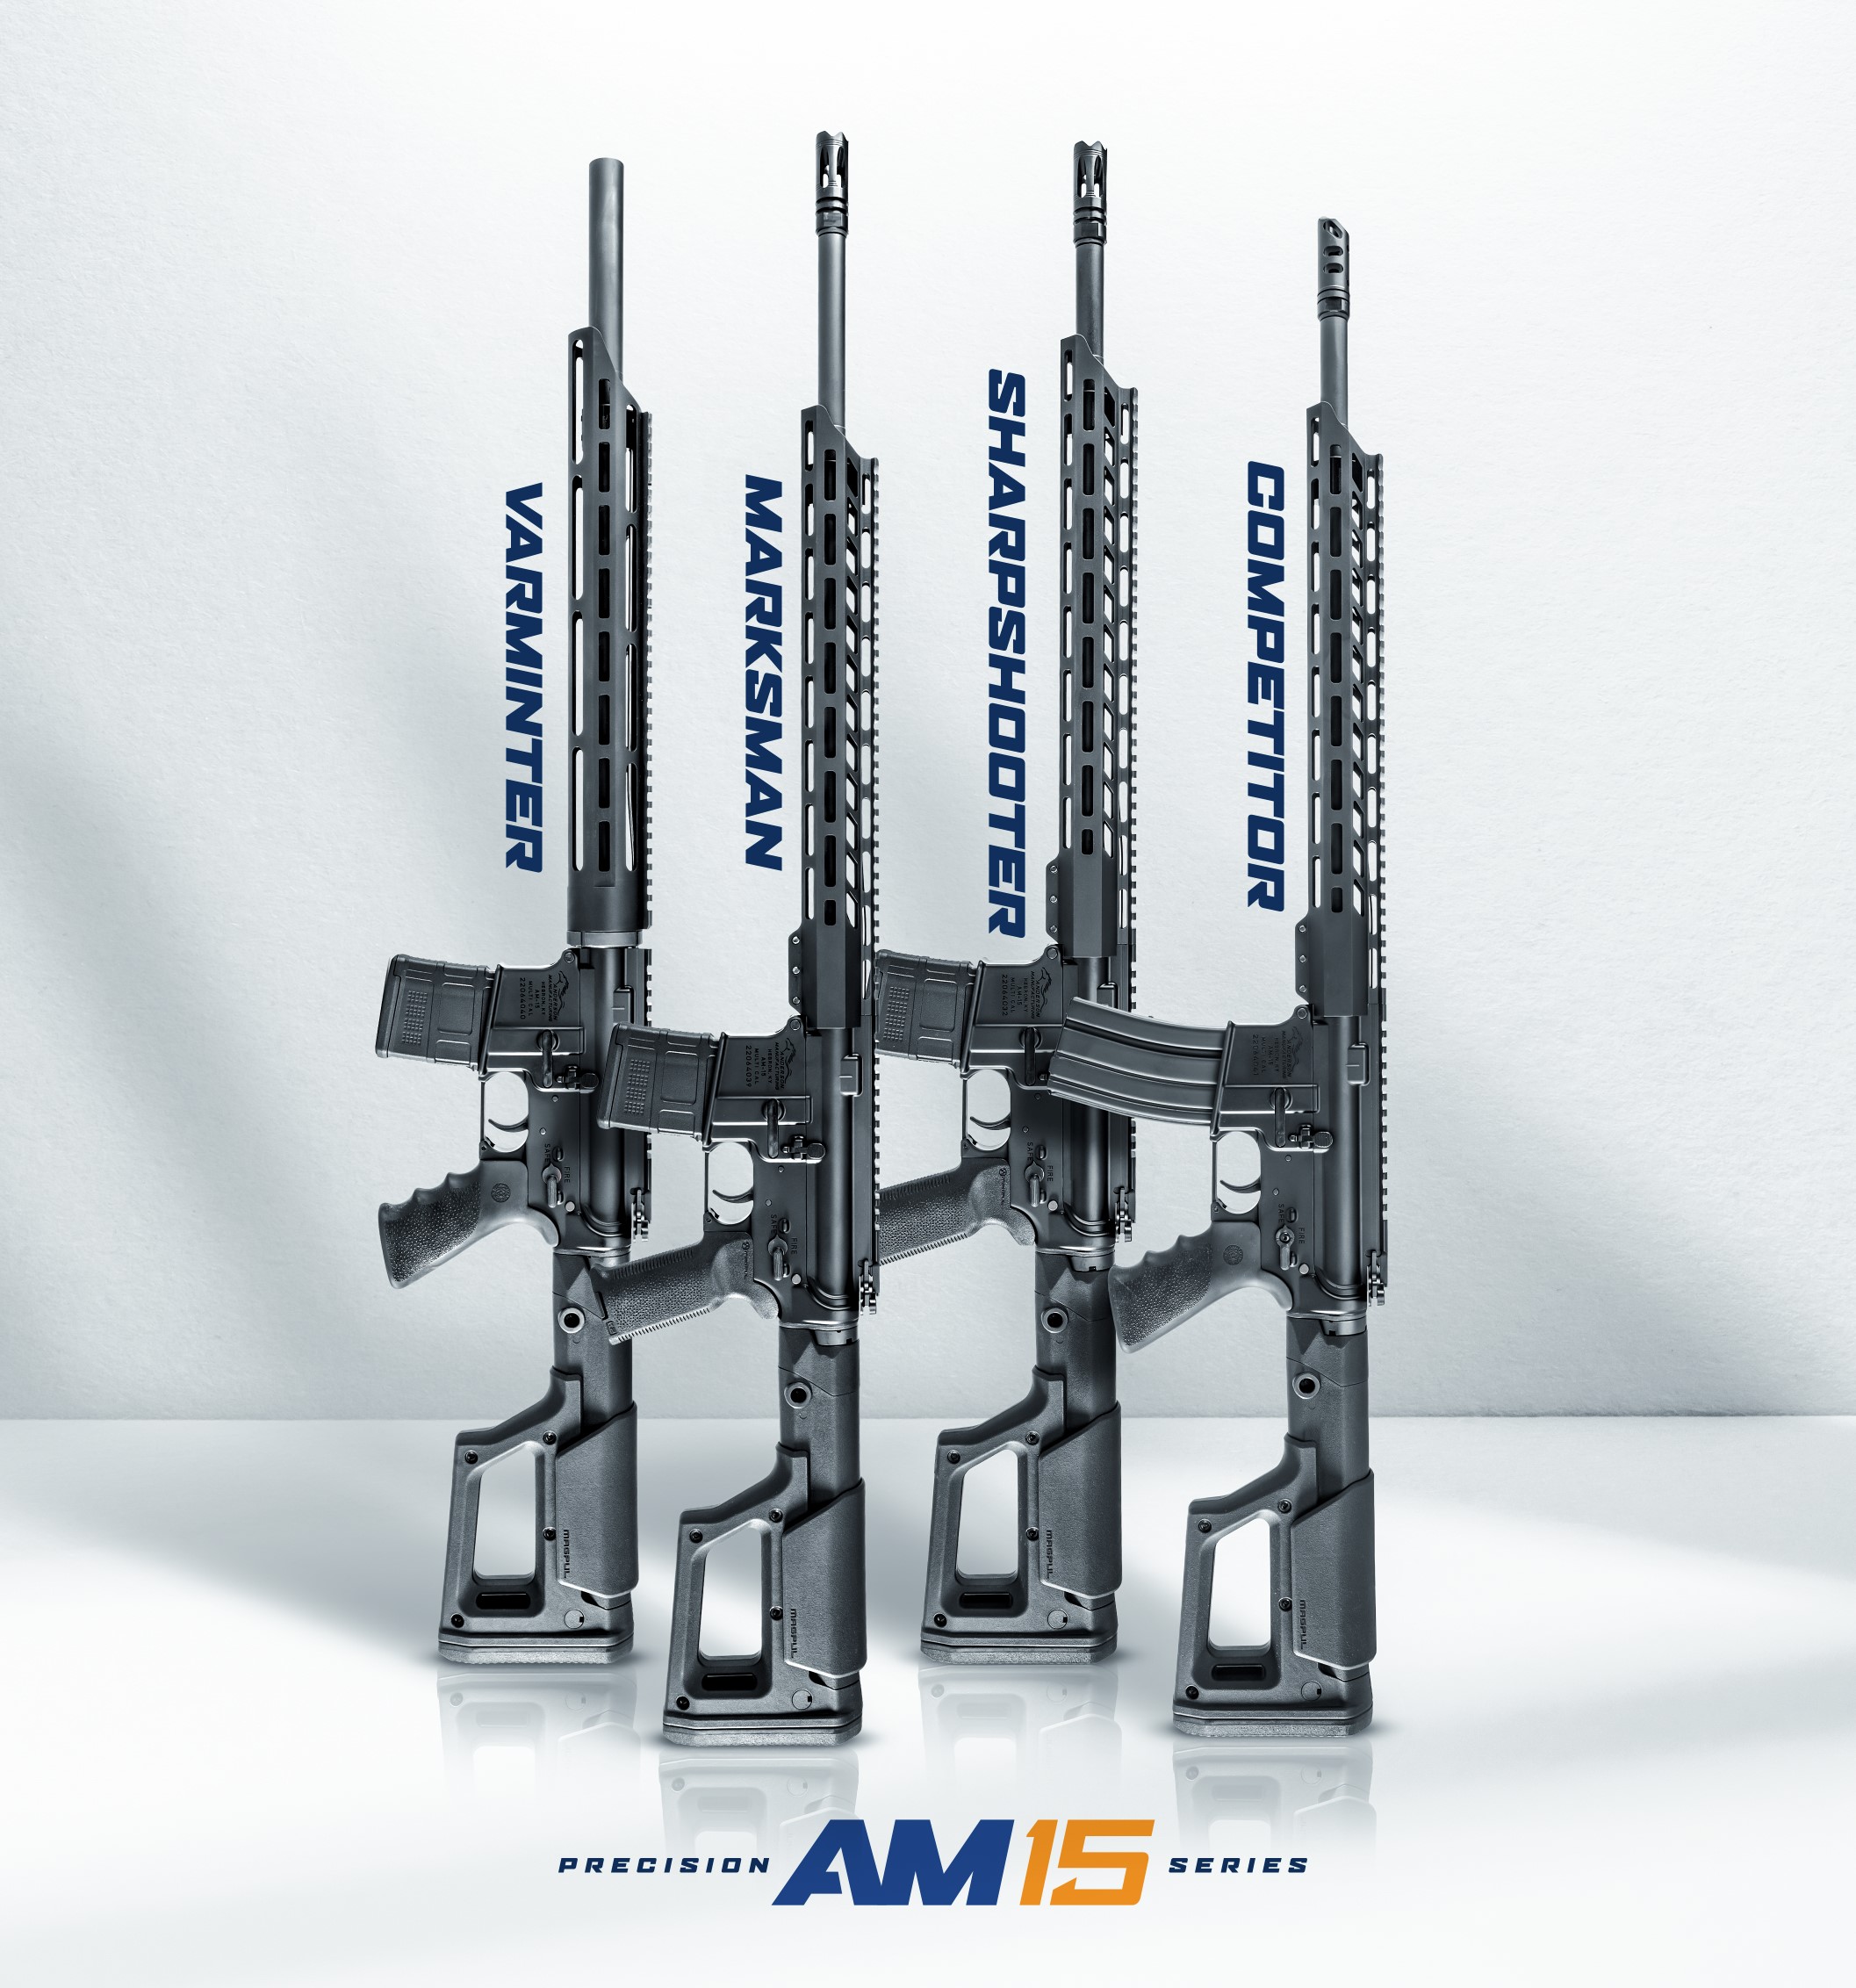 Anderson Manufacturing Hits Bullseye with AM-15 Precision Series Launch